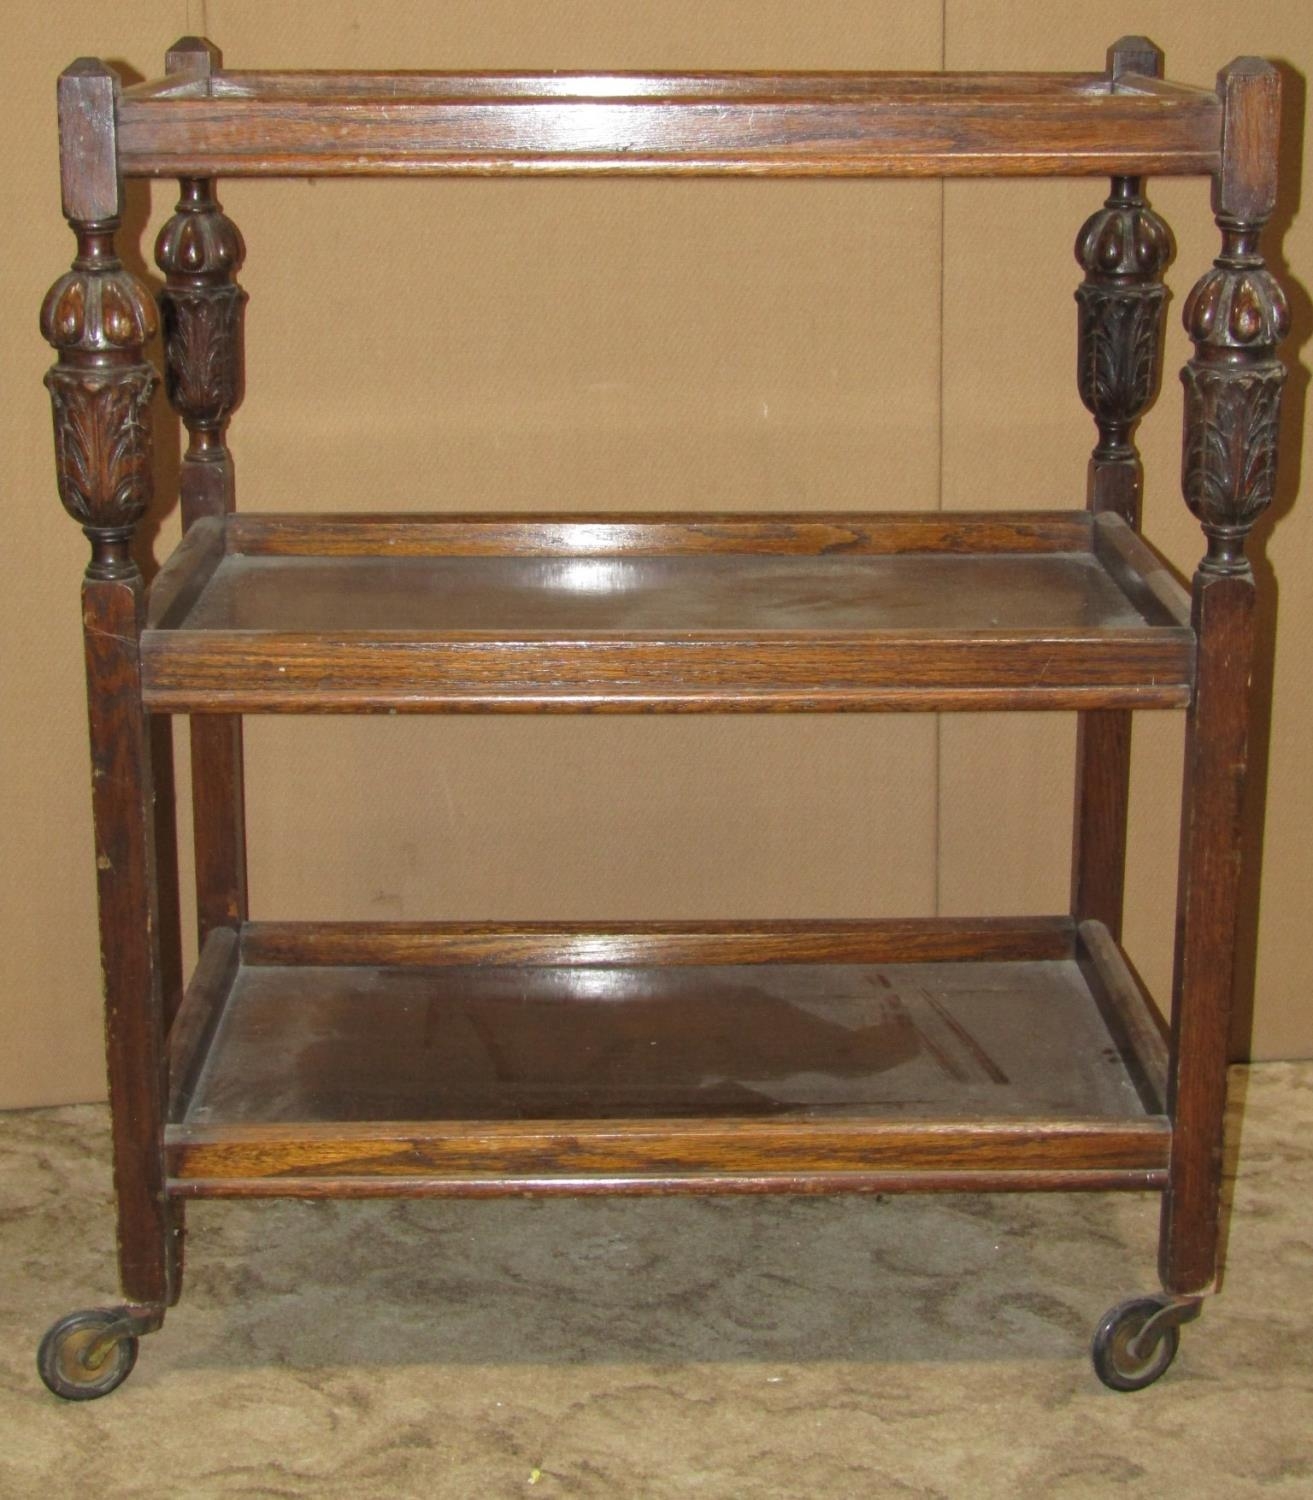 An inlaid Edwardian mahogany occasional table together with a three tier oak tea trolley of